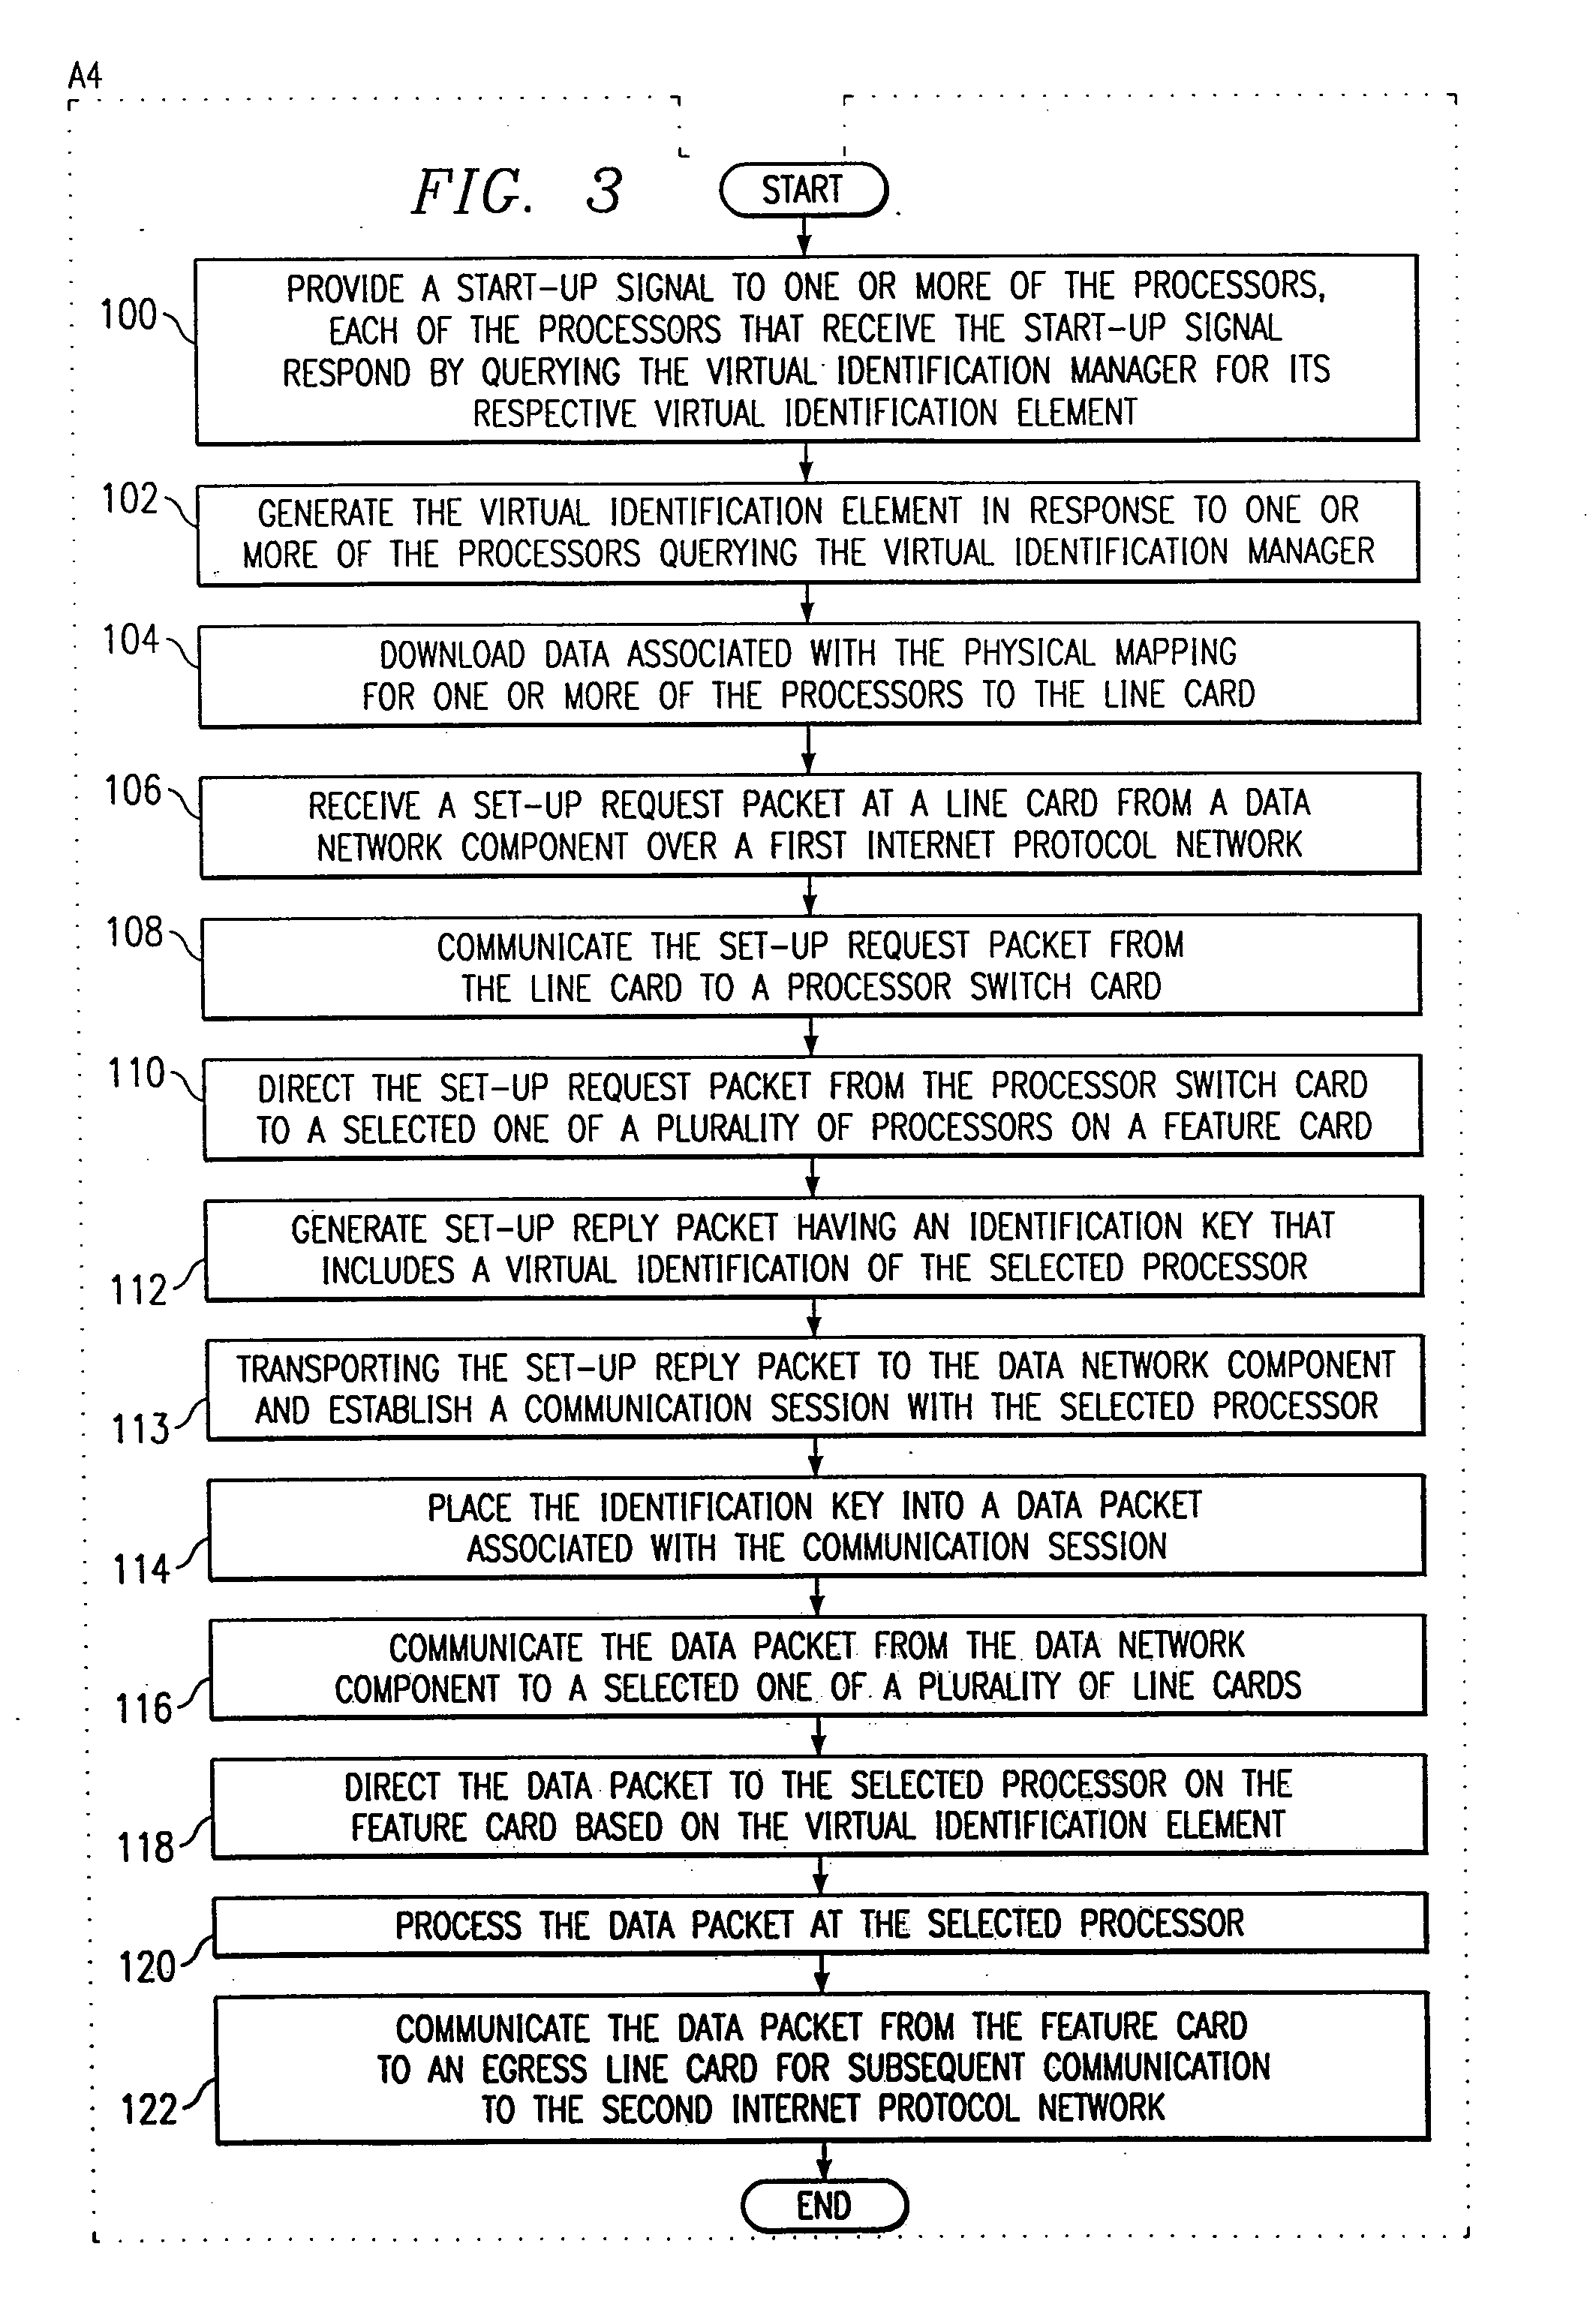 System and Method for Processing Packets in a Multi-Processor Environment